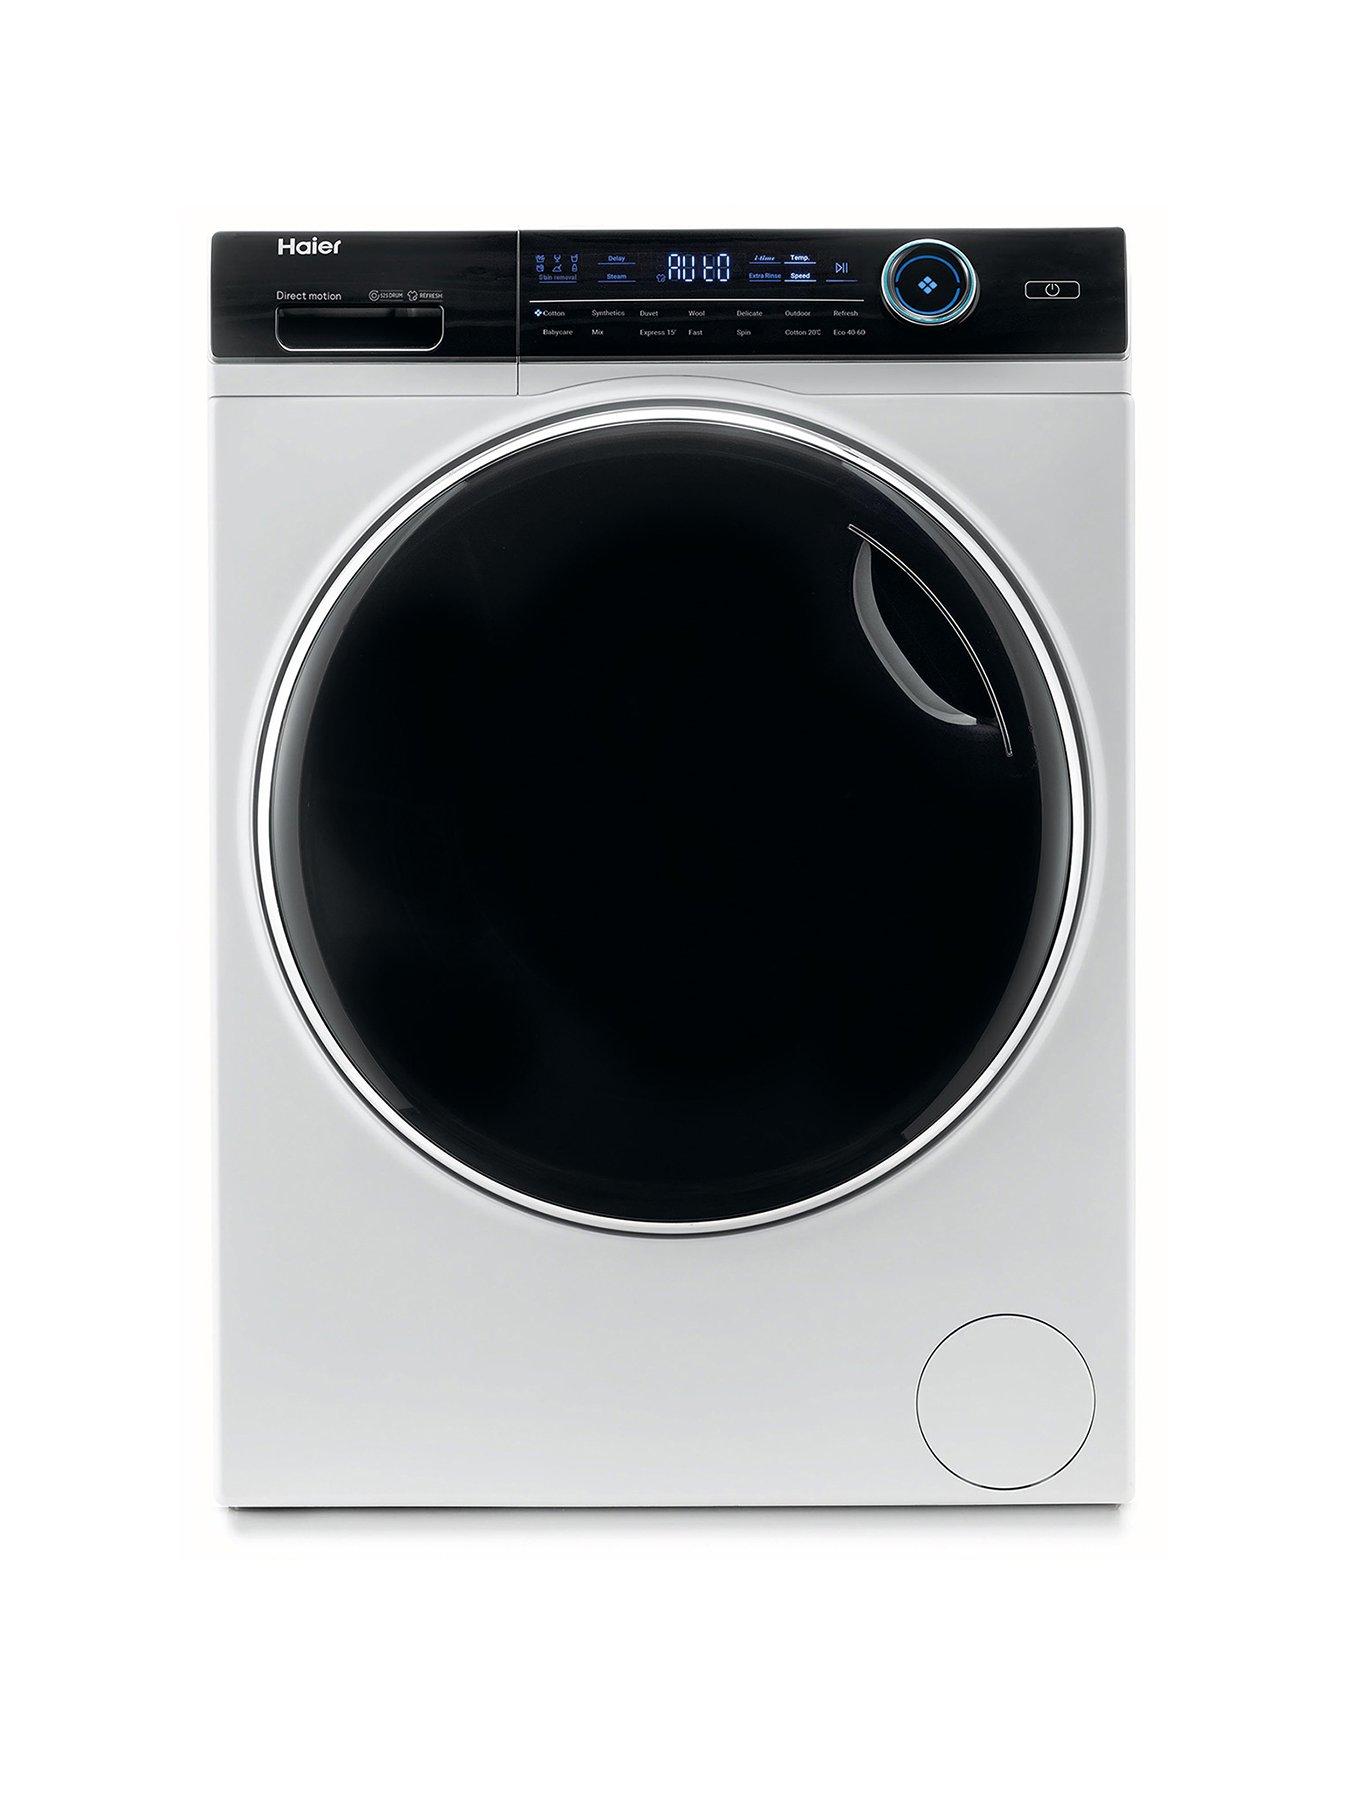 Haier I-Pro Series 7 Hw80-B14979 8Kg Wash, 1400 Spin Washing Machine, A Rated - White